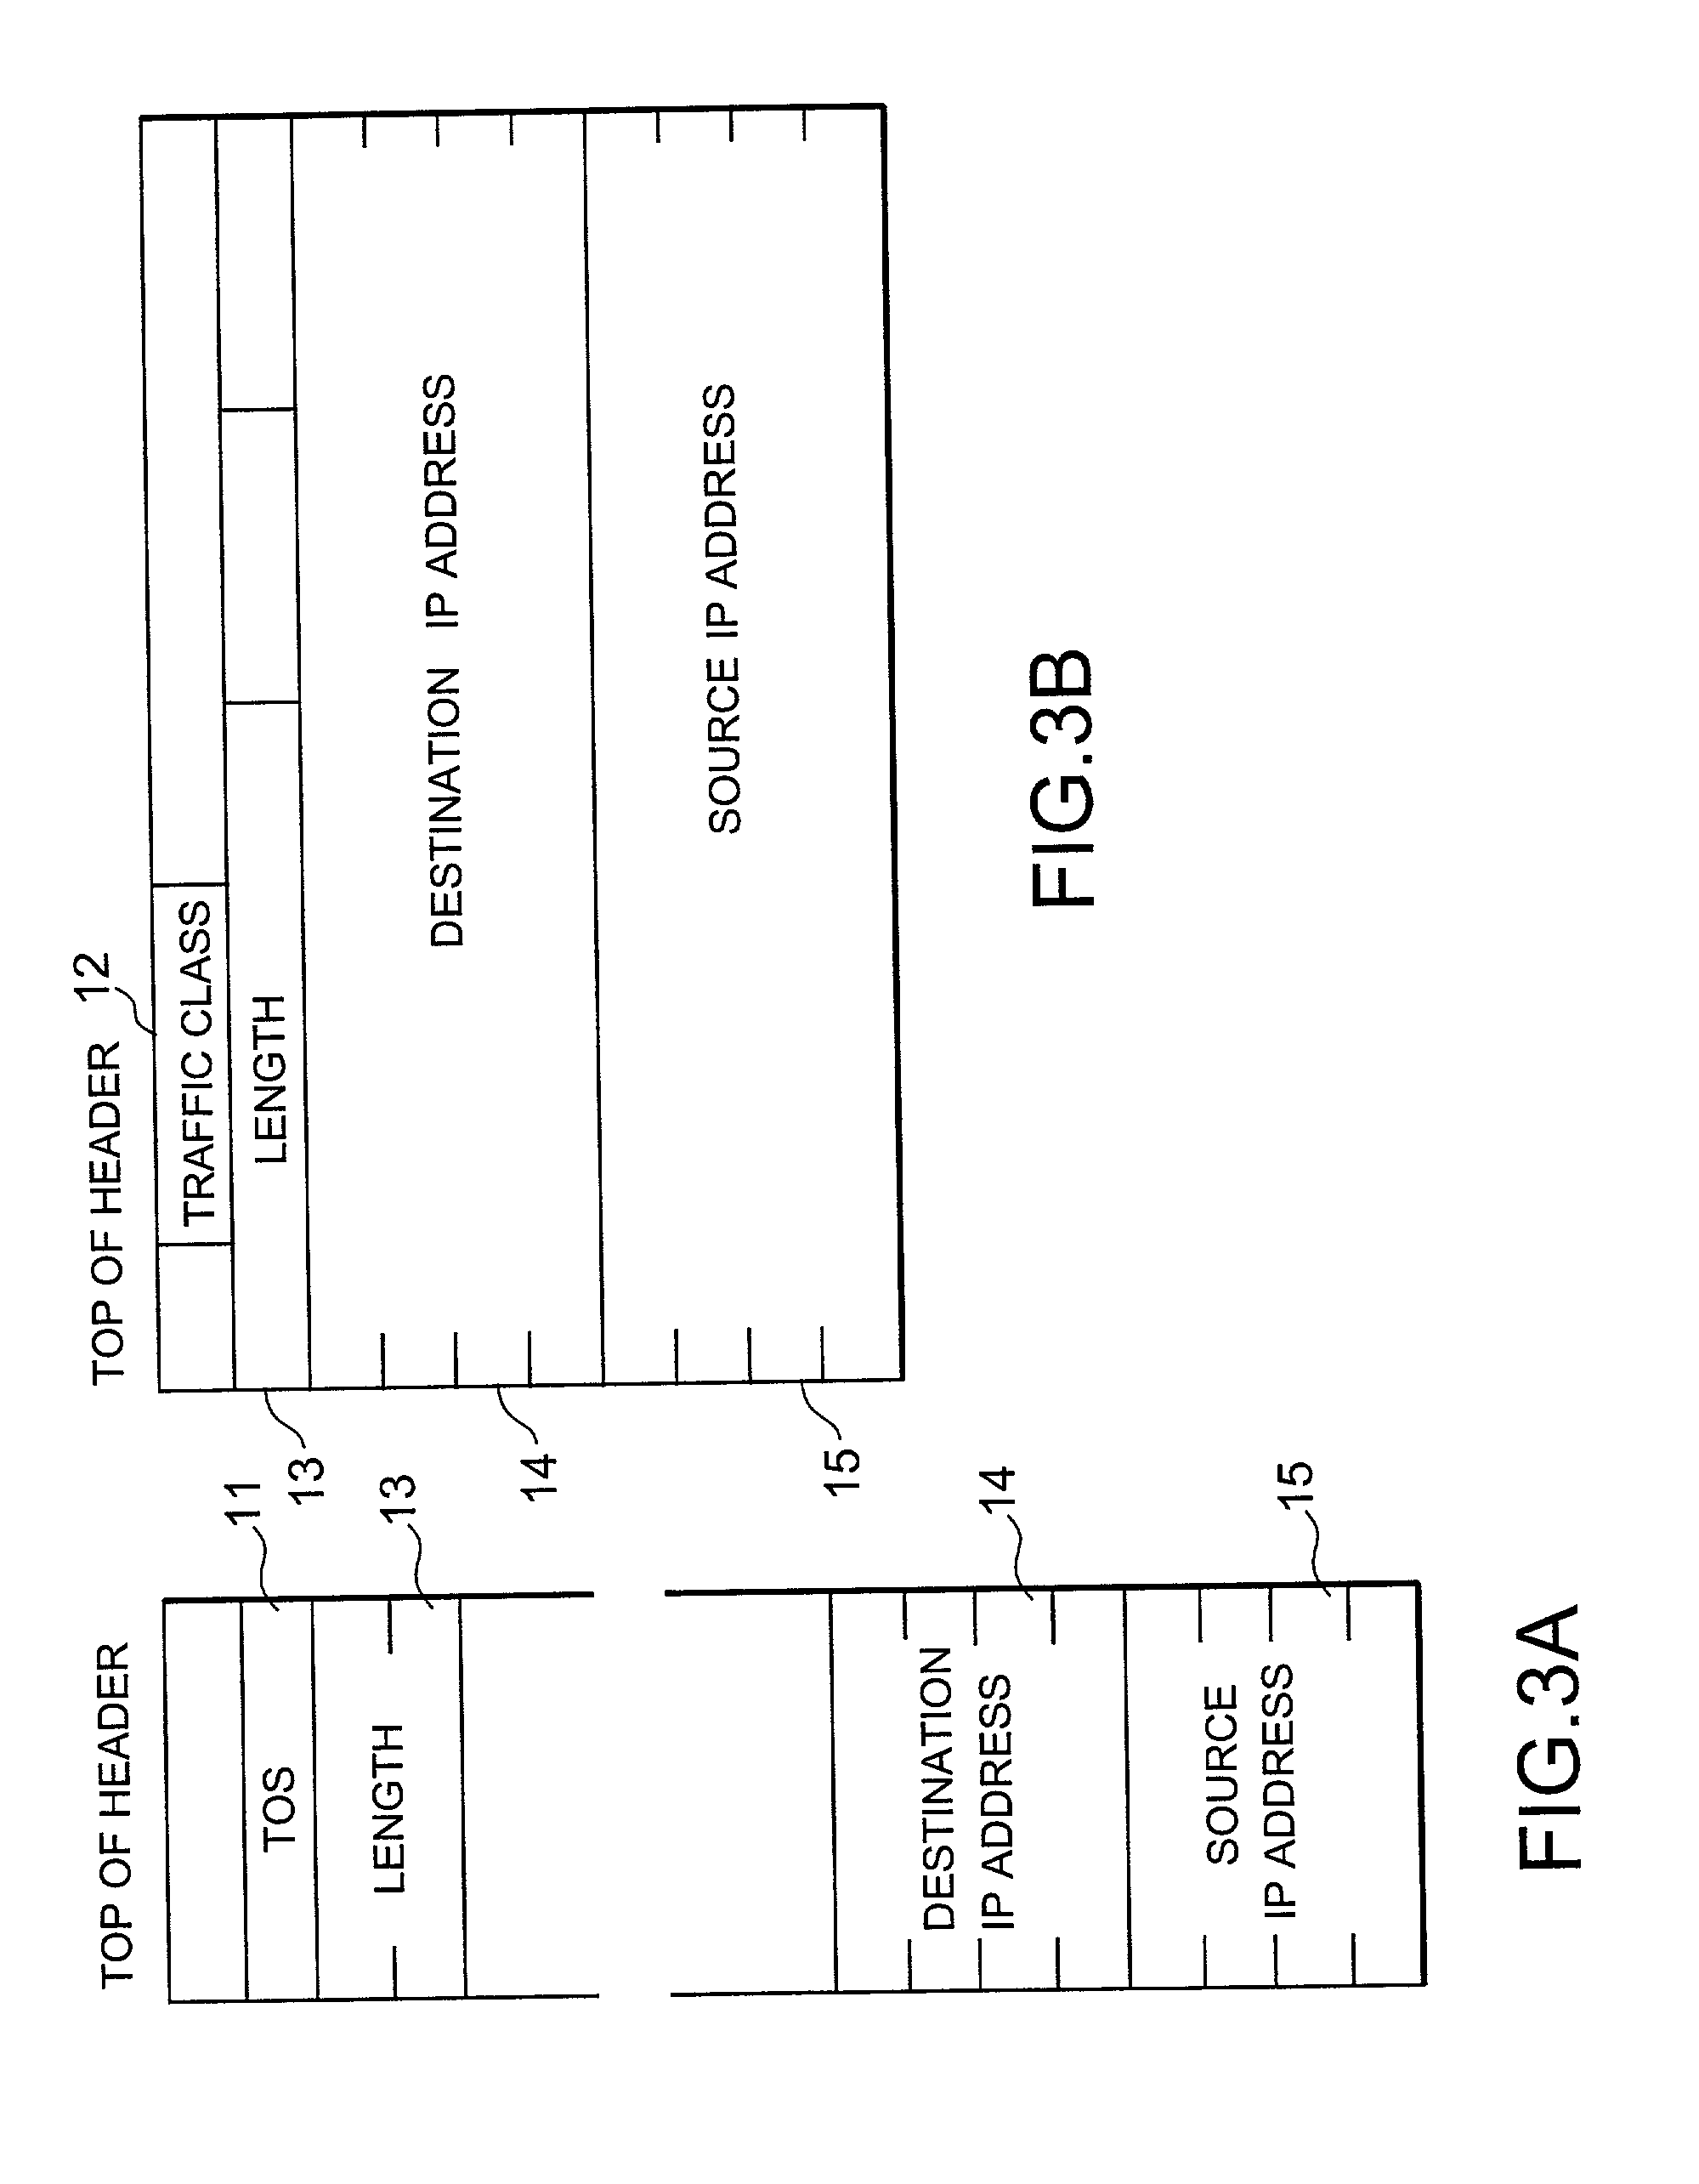 Network traffic monitoring system and monitoring method